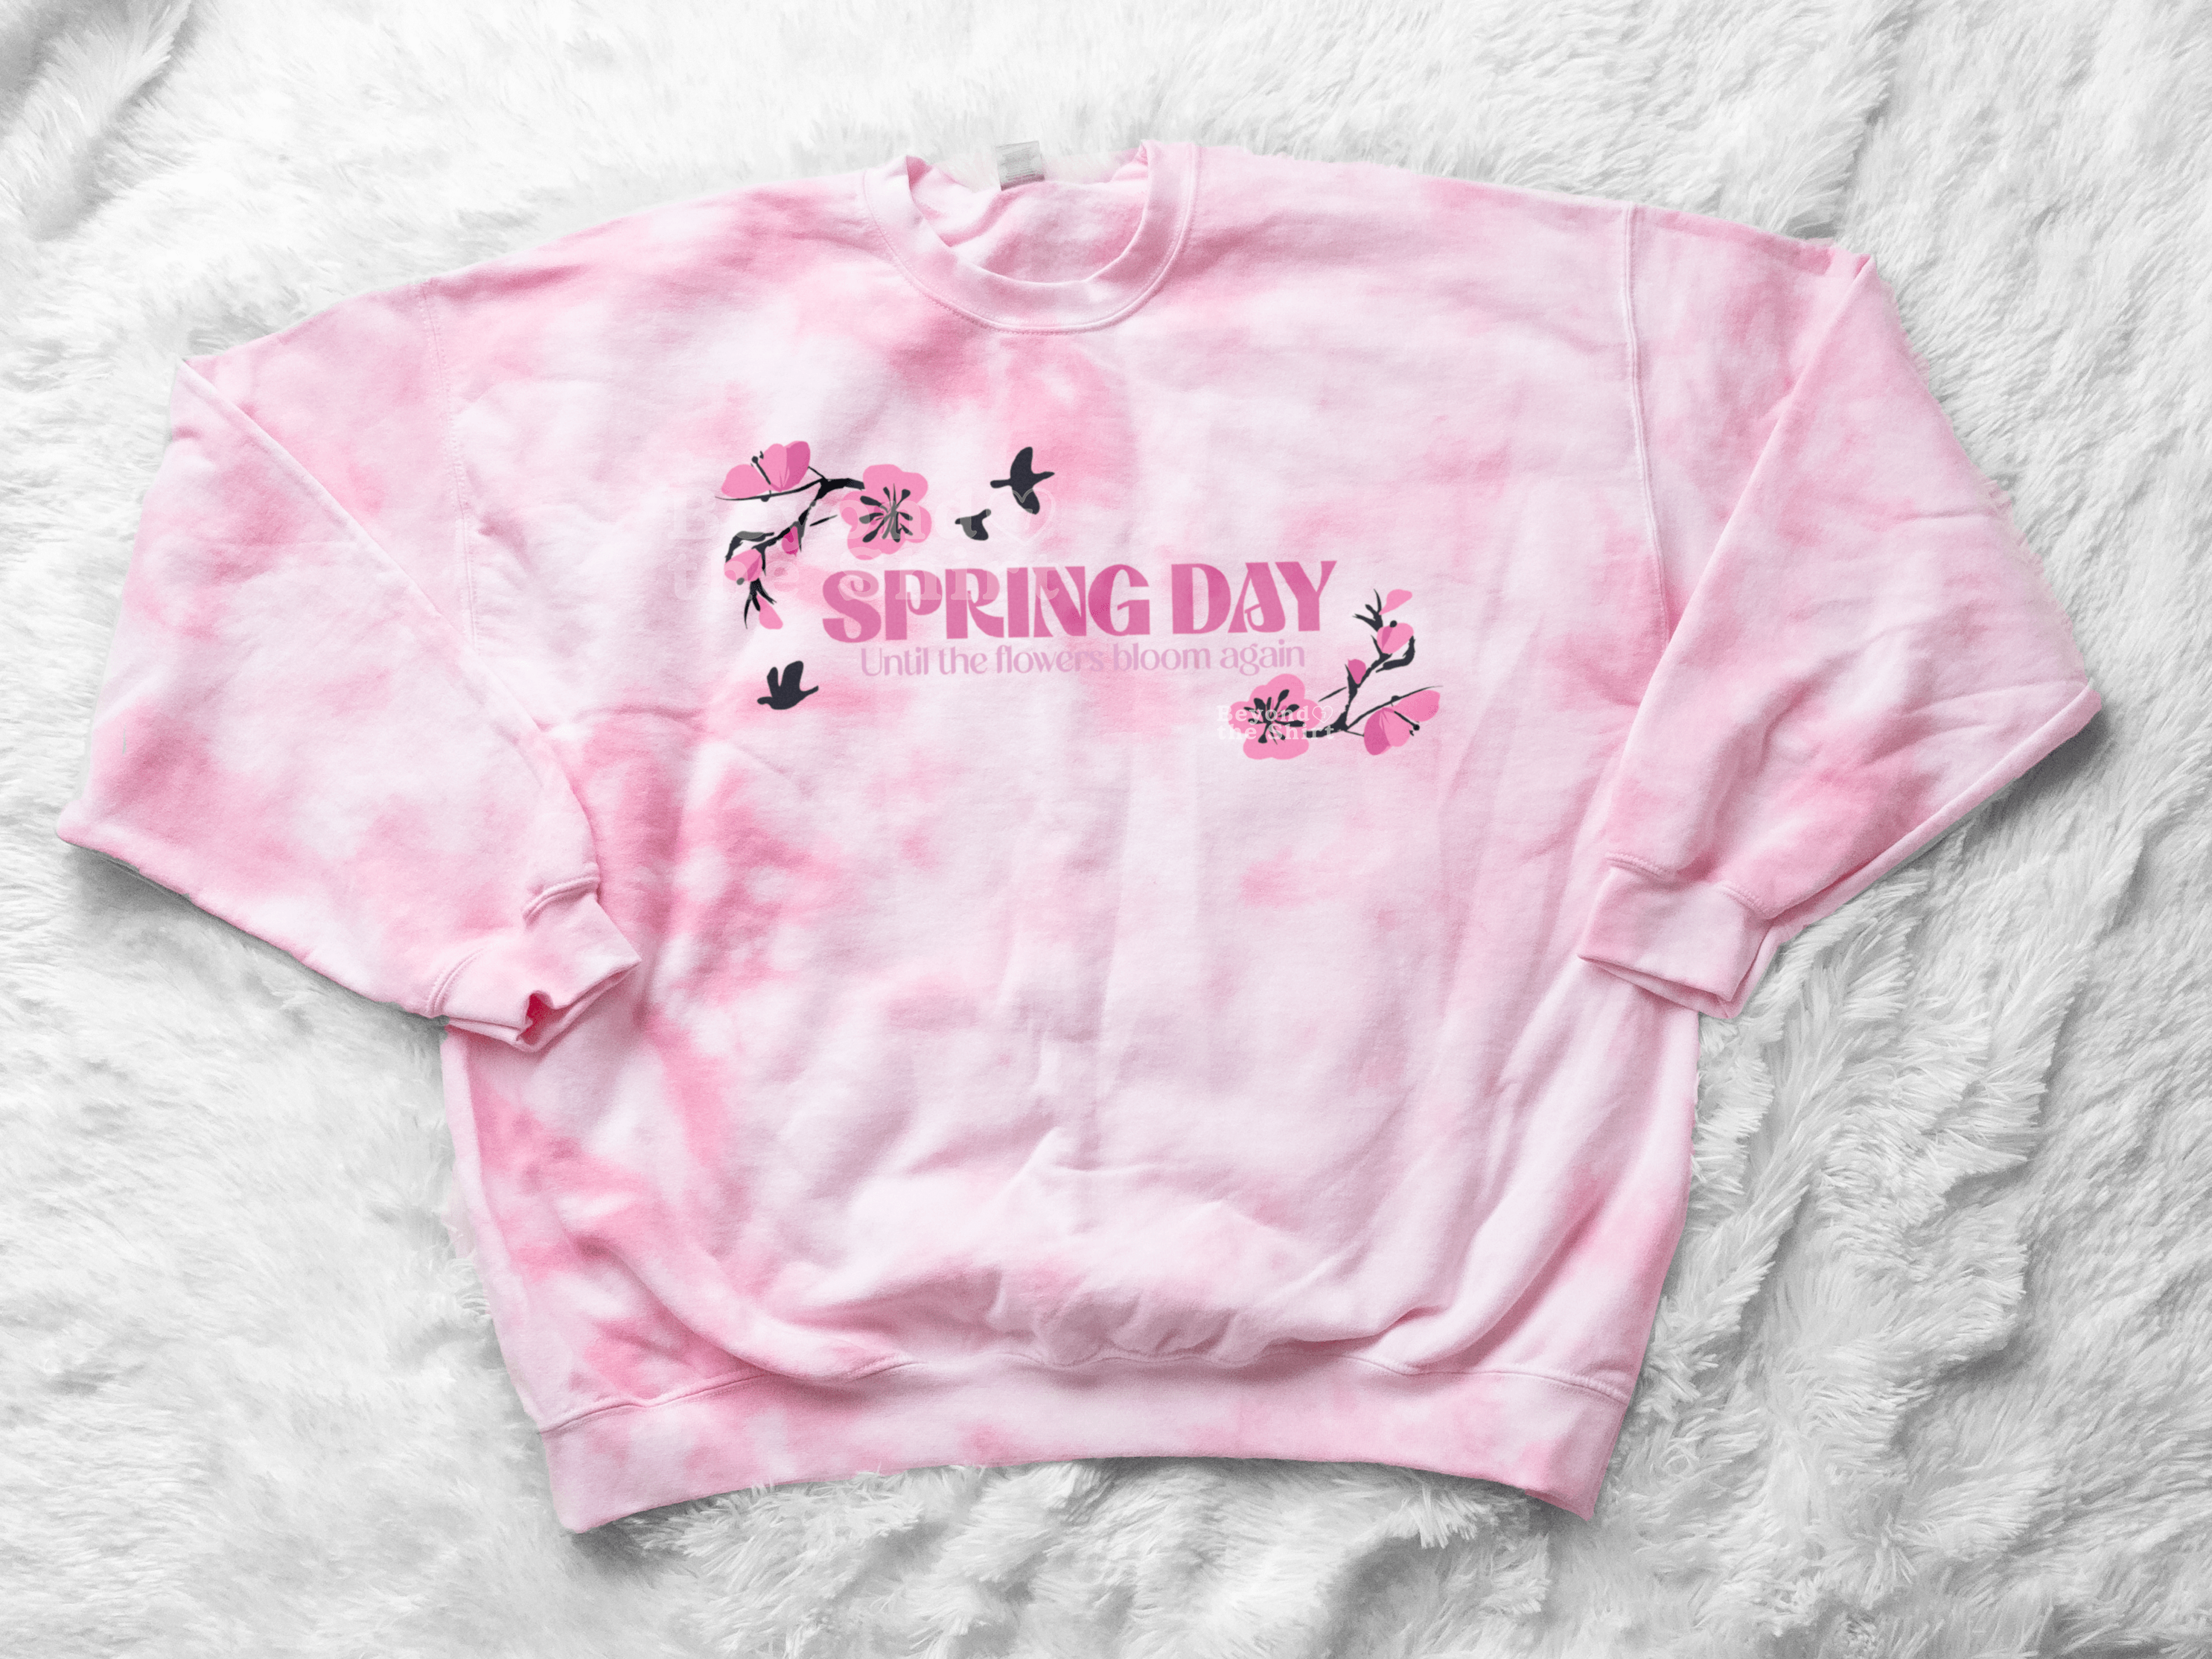 Spring Day T-Shirt and Sweatshirts